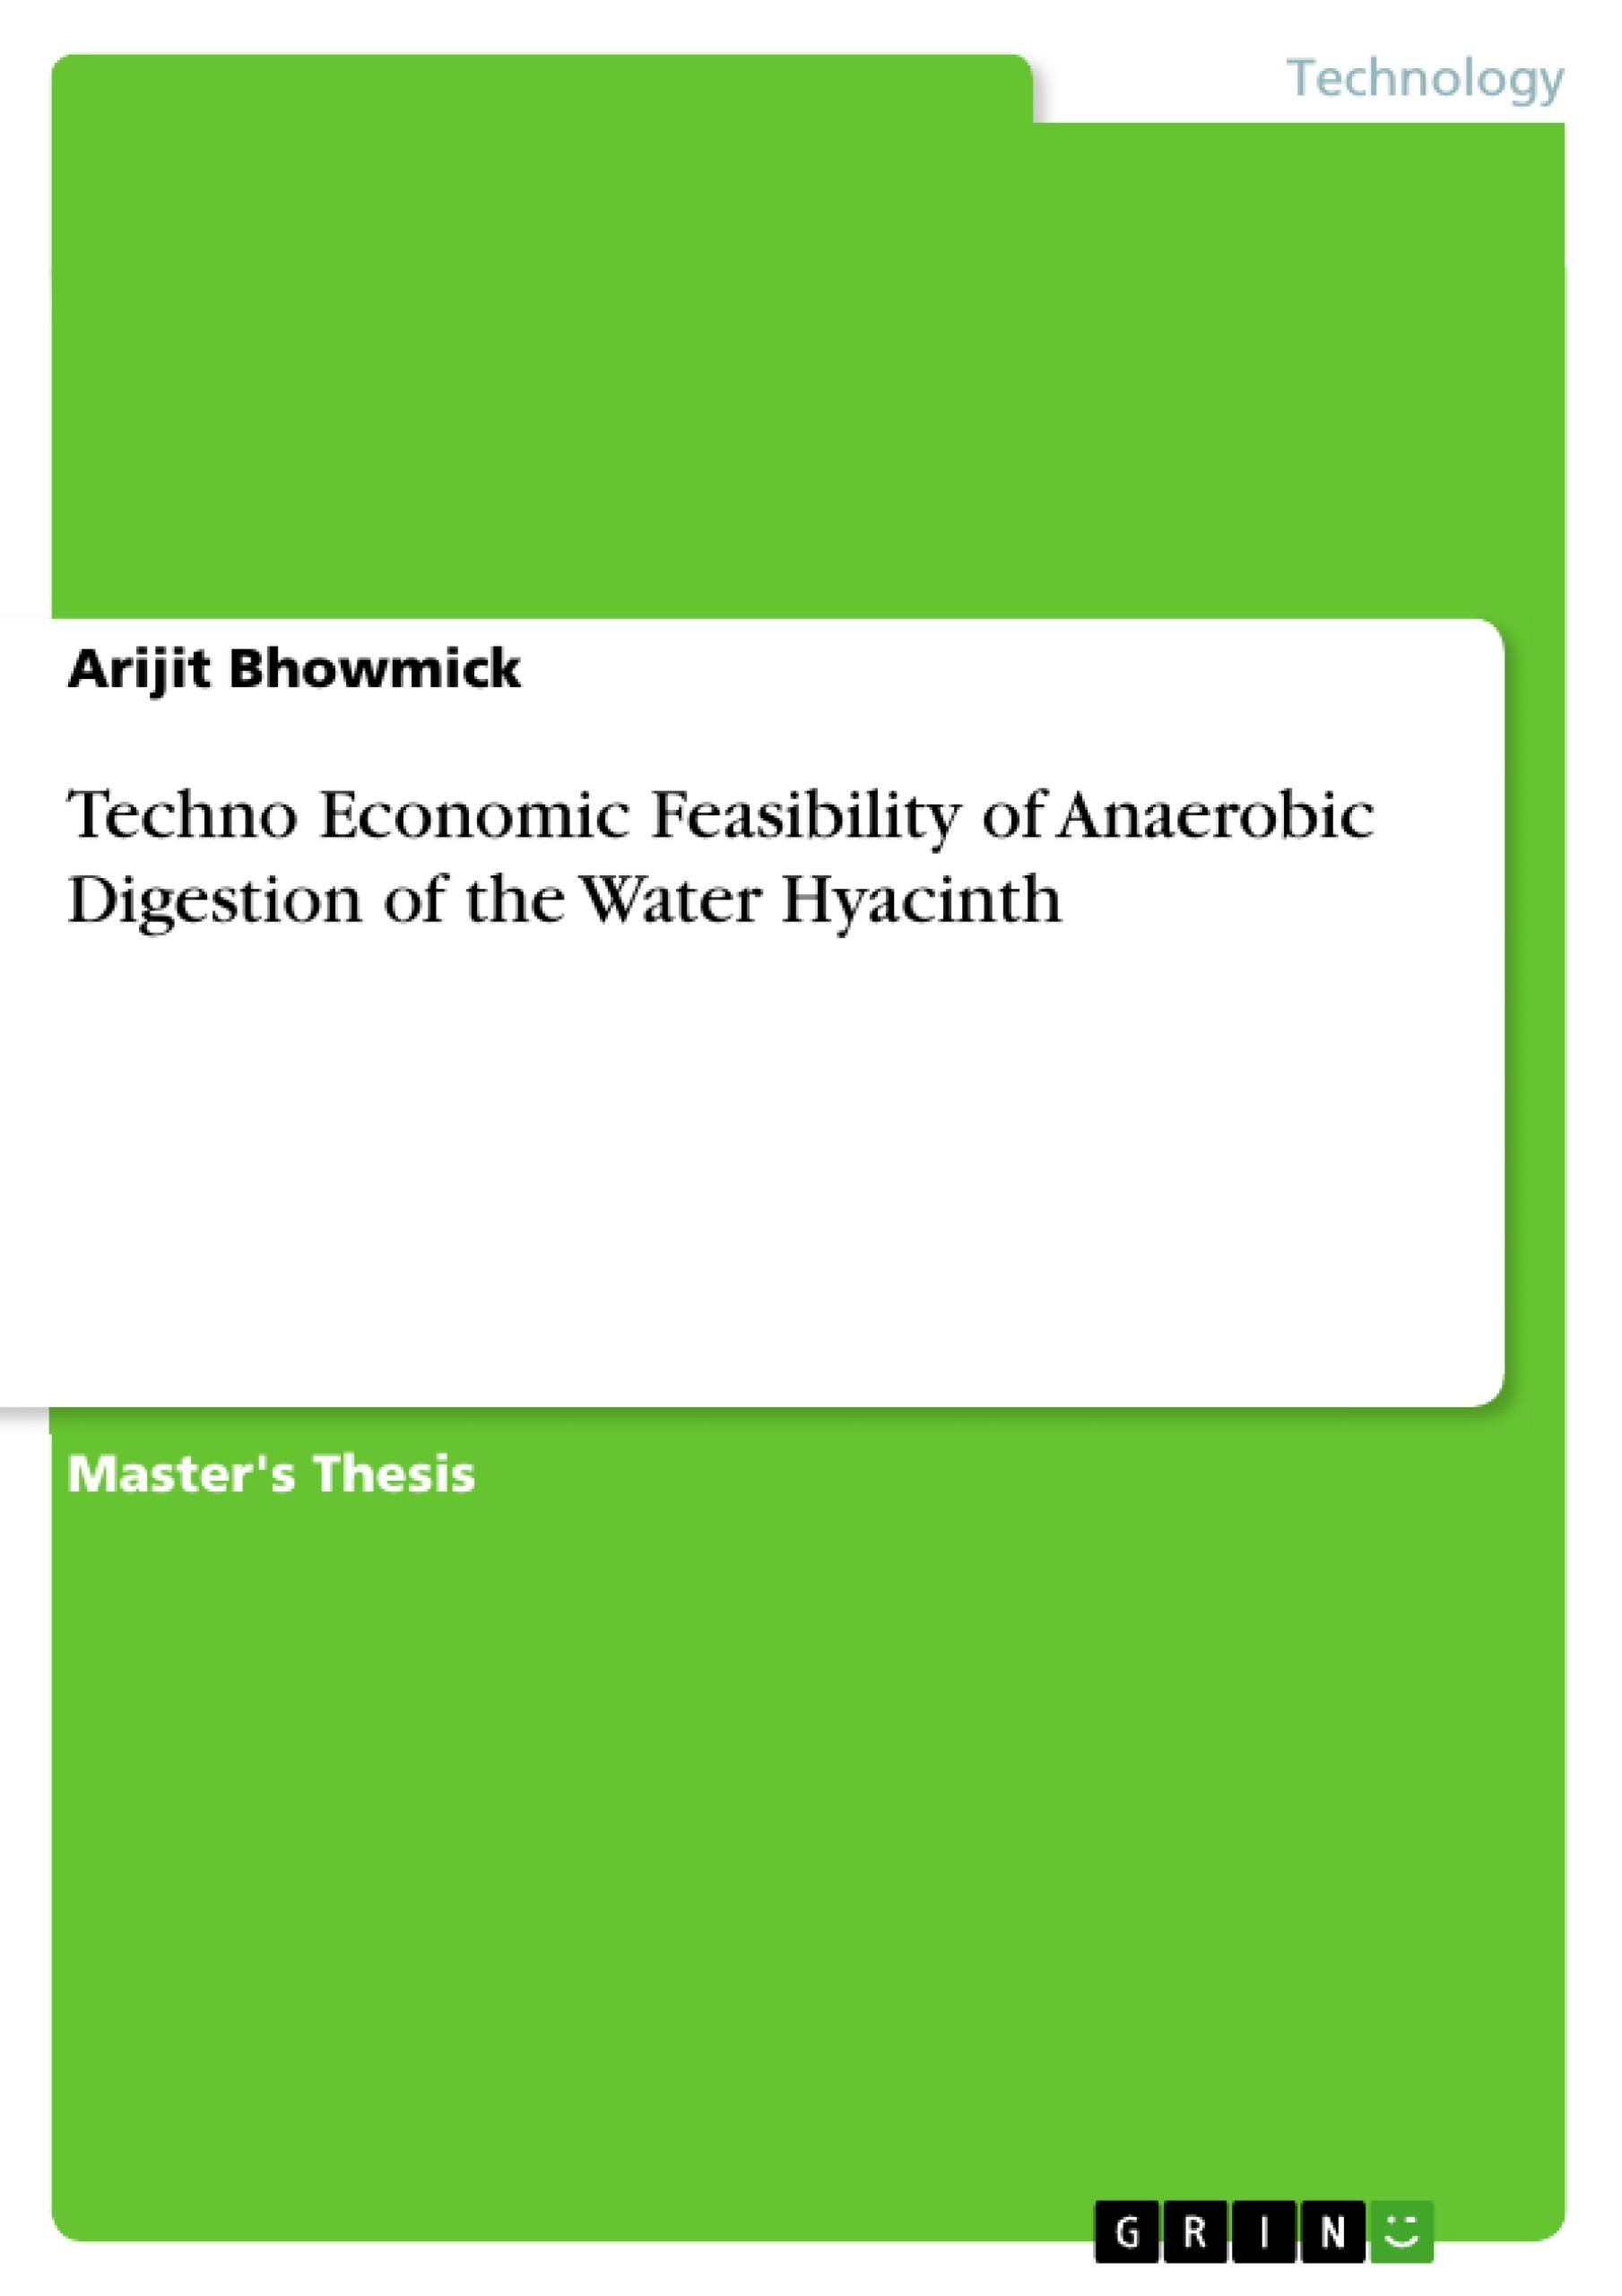 Title: Techno Economic Feasibility of Anaerobic Digestion of the Water Hyacinth